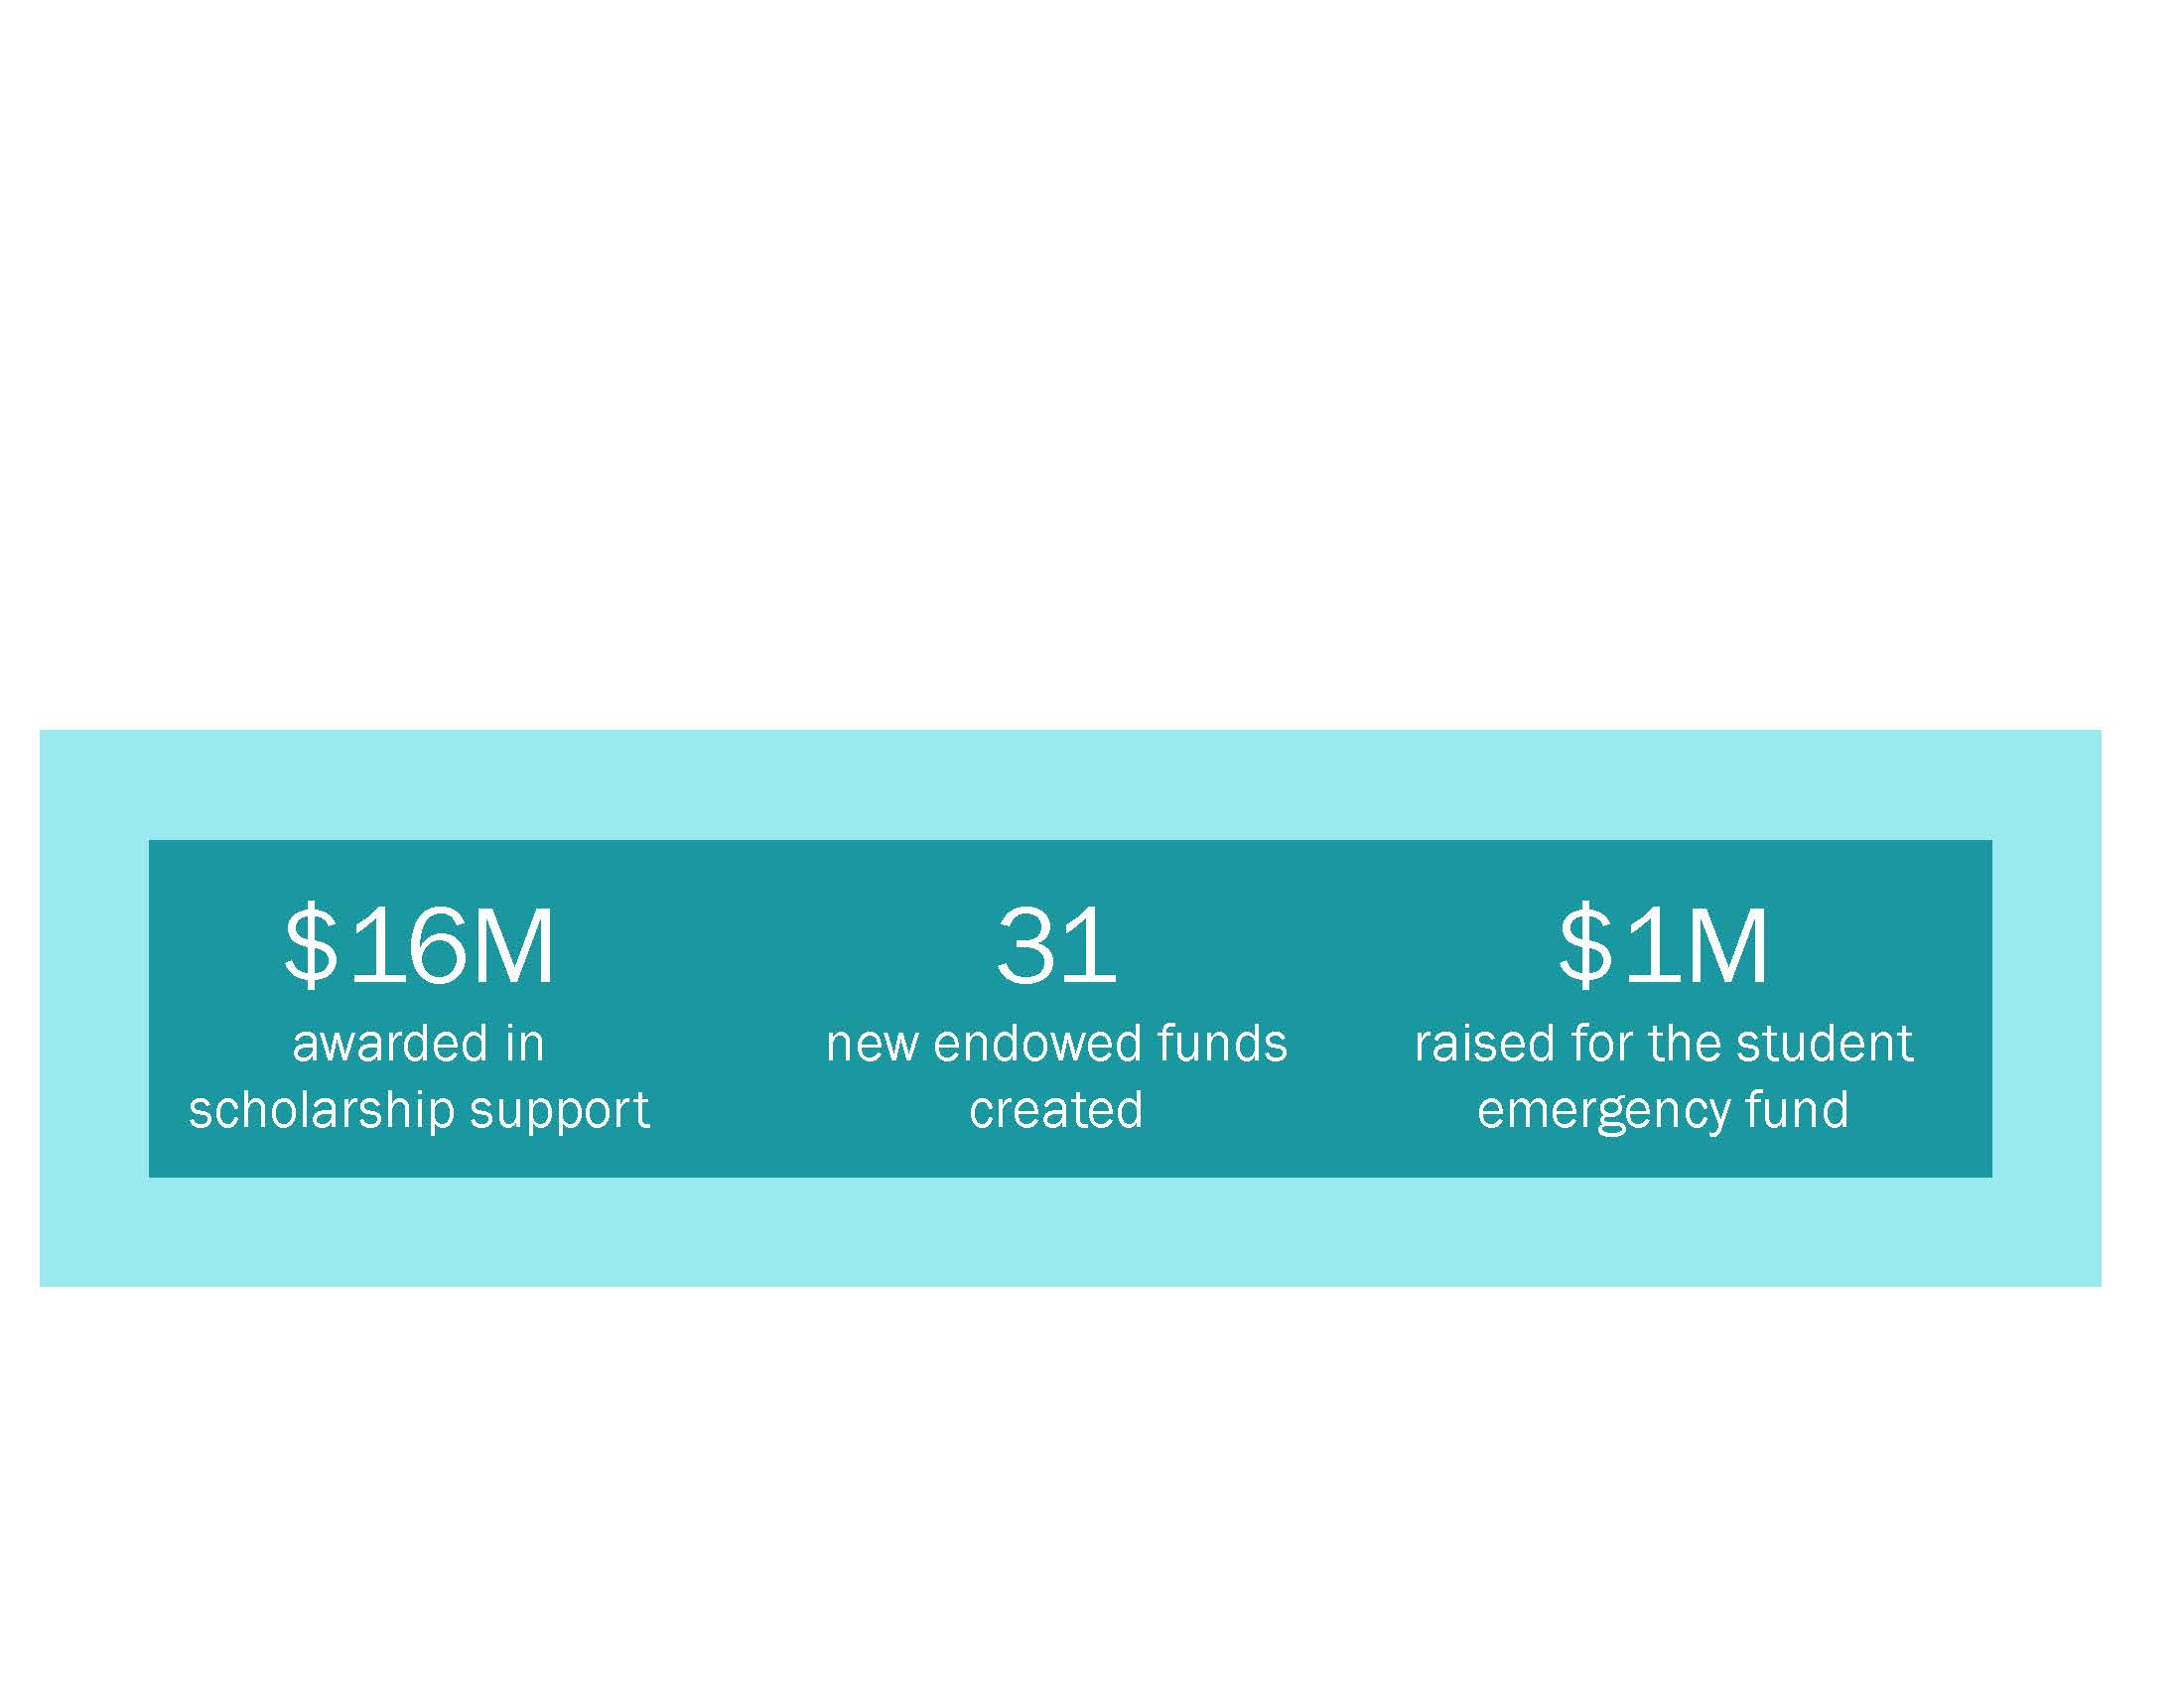 $16M+ raised in scholarship support; 31 new endowed funds created; $1M+ raised for the student emergency fund